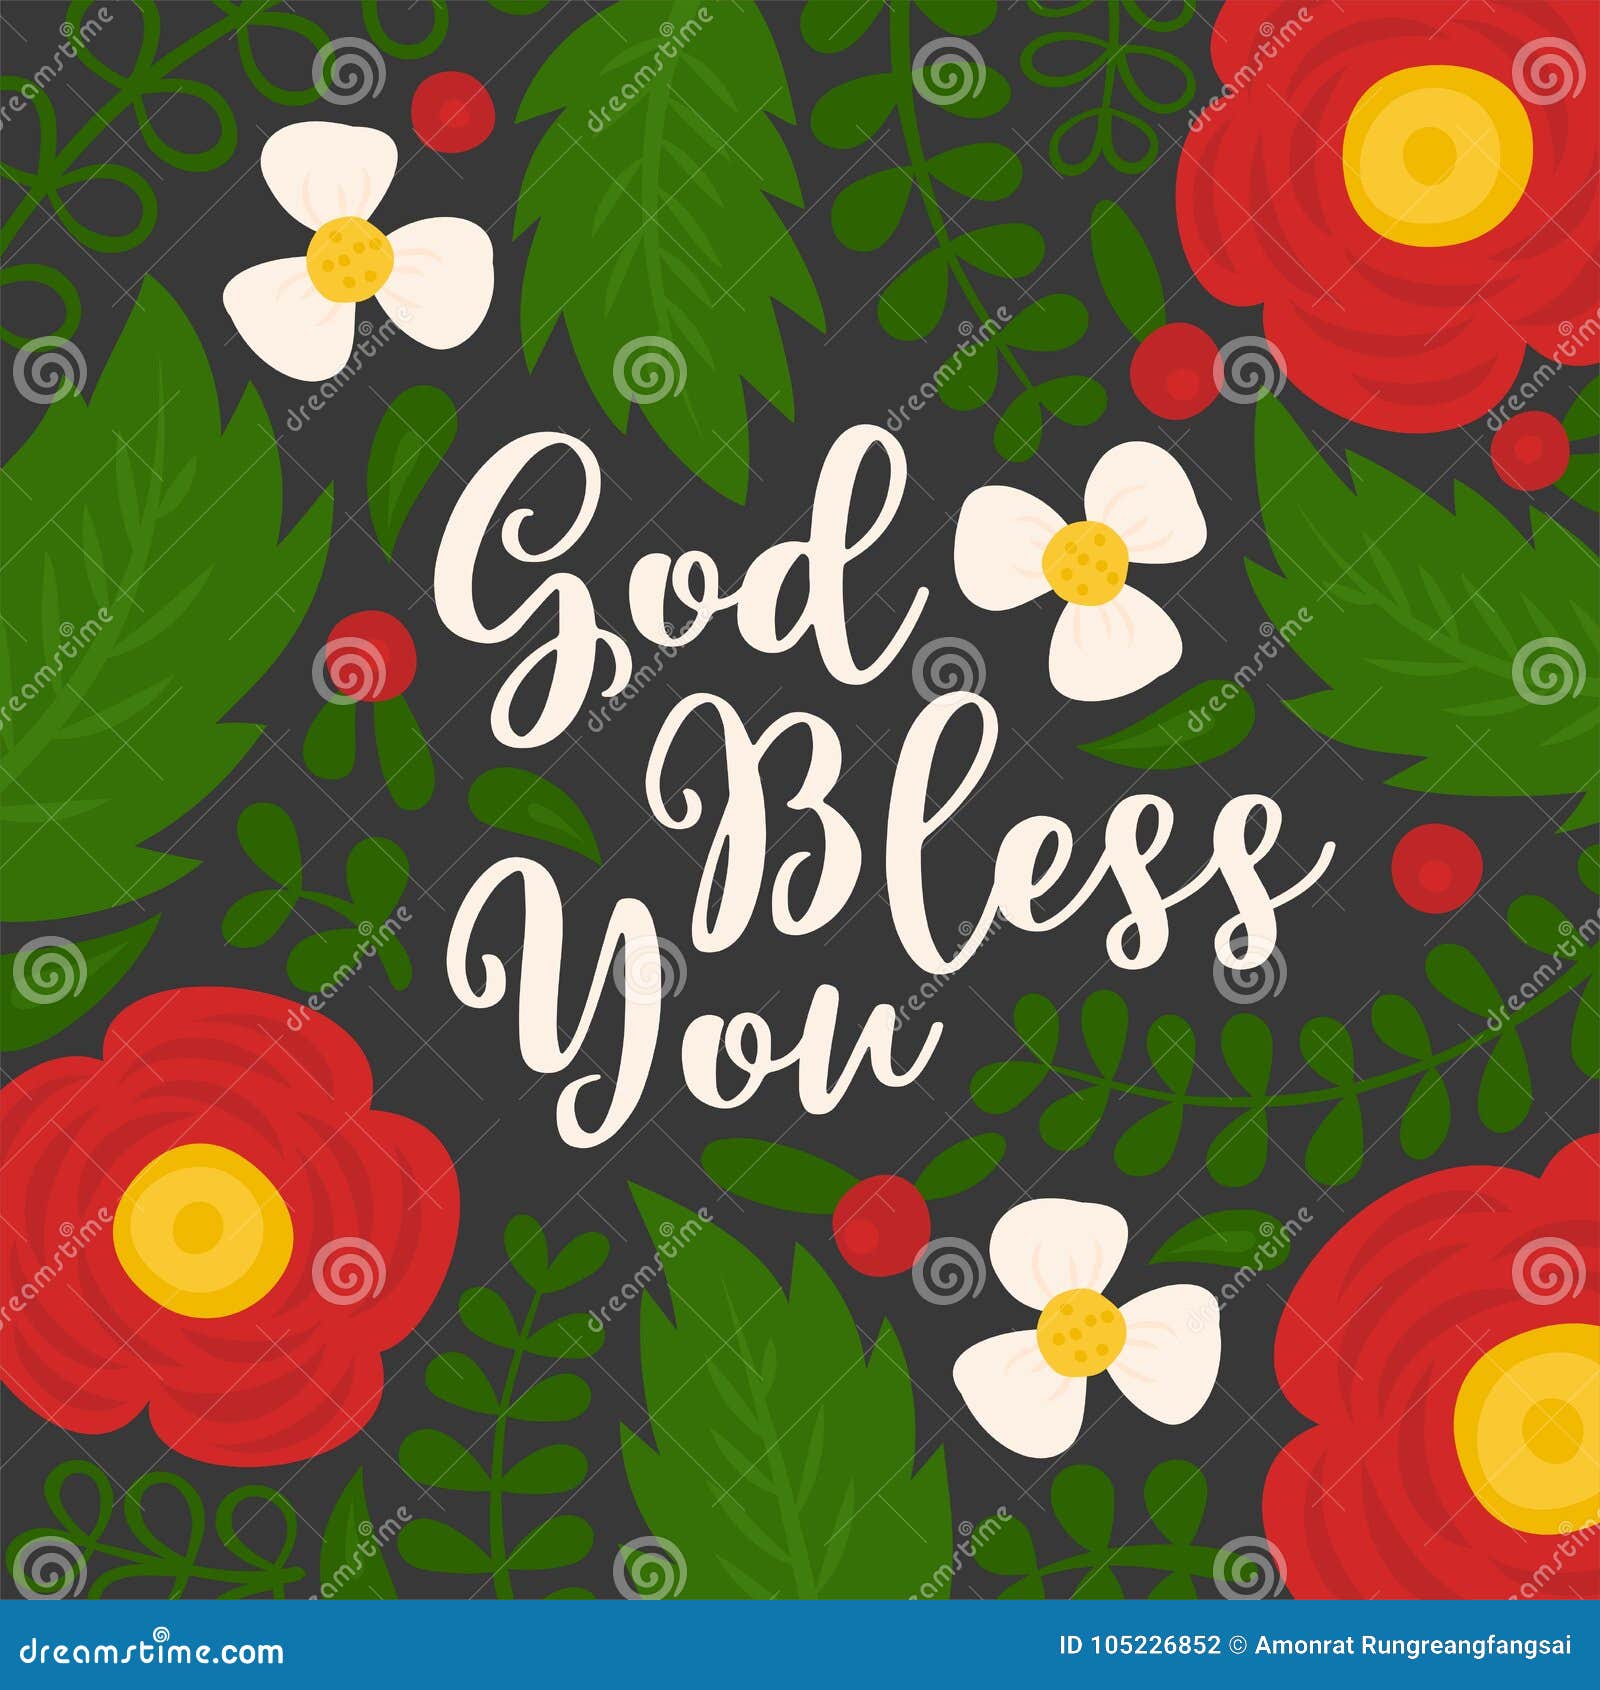 God Bless You Hand Lettering Quote with Floral and Leaves Doodles ...